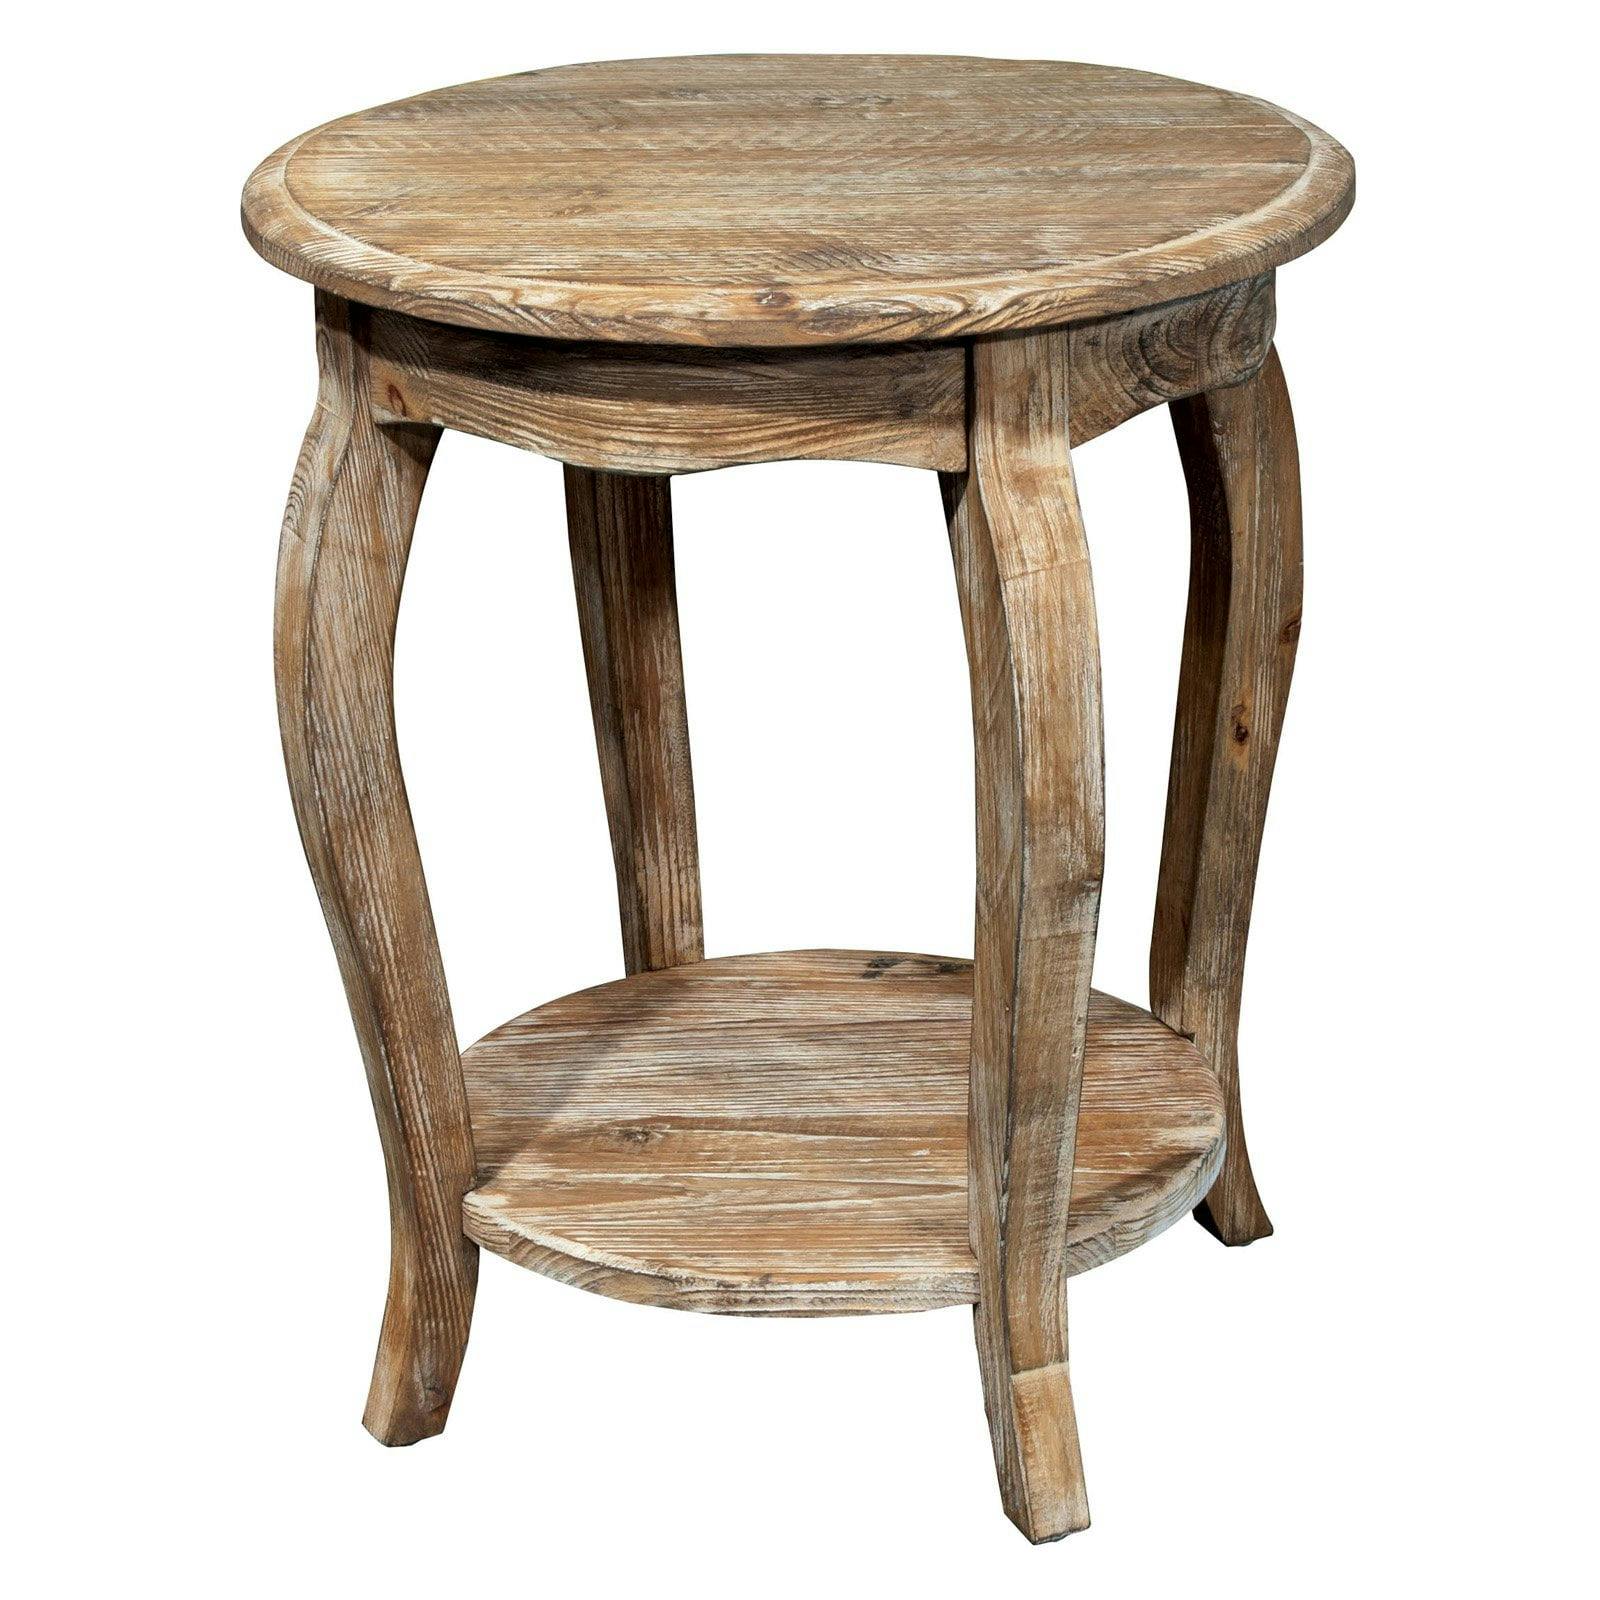 Rustic Reclaimed Wood Round End Table in Driftwood Brown